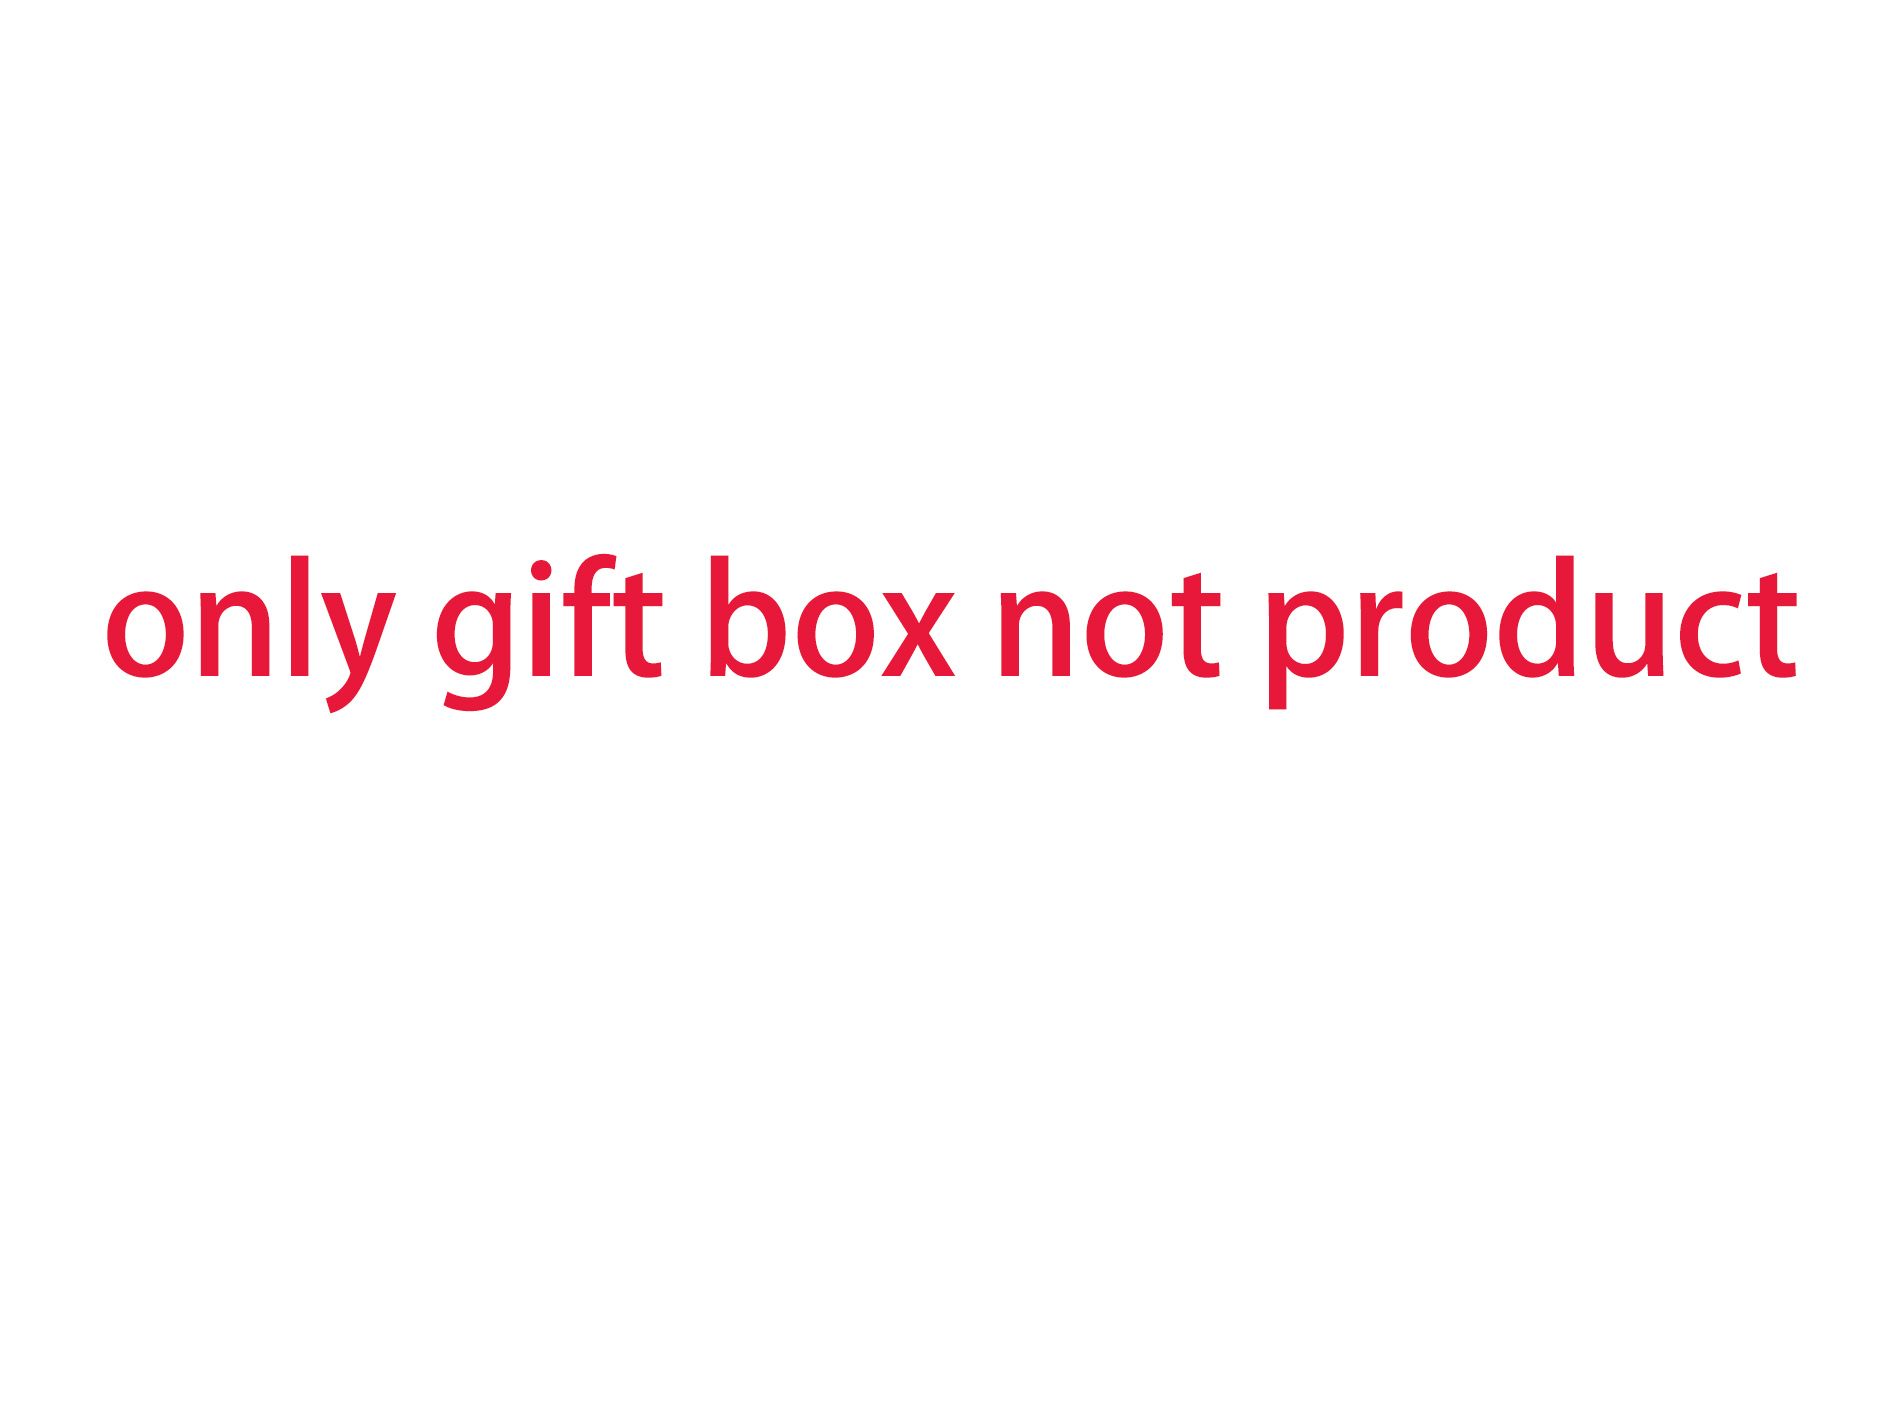 extra gift box packing fee